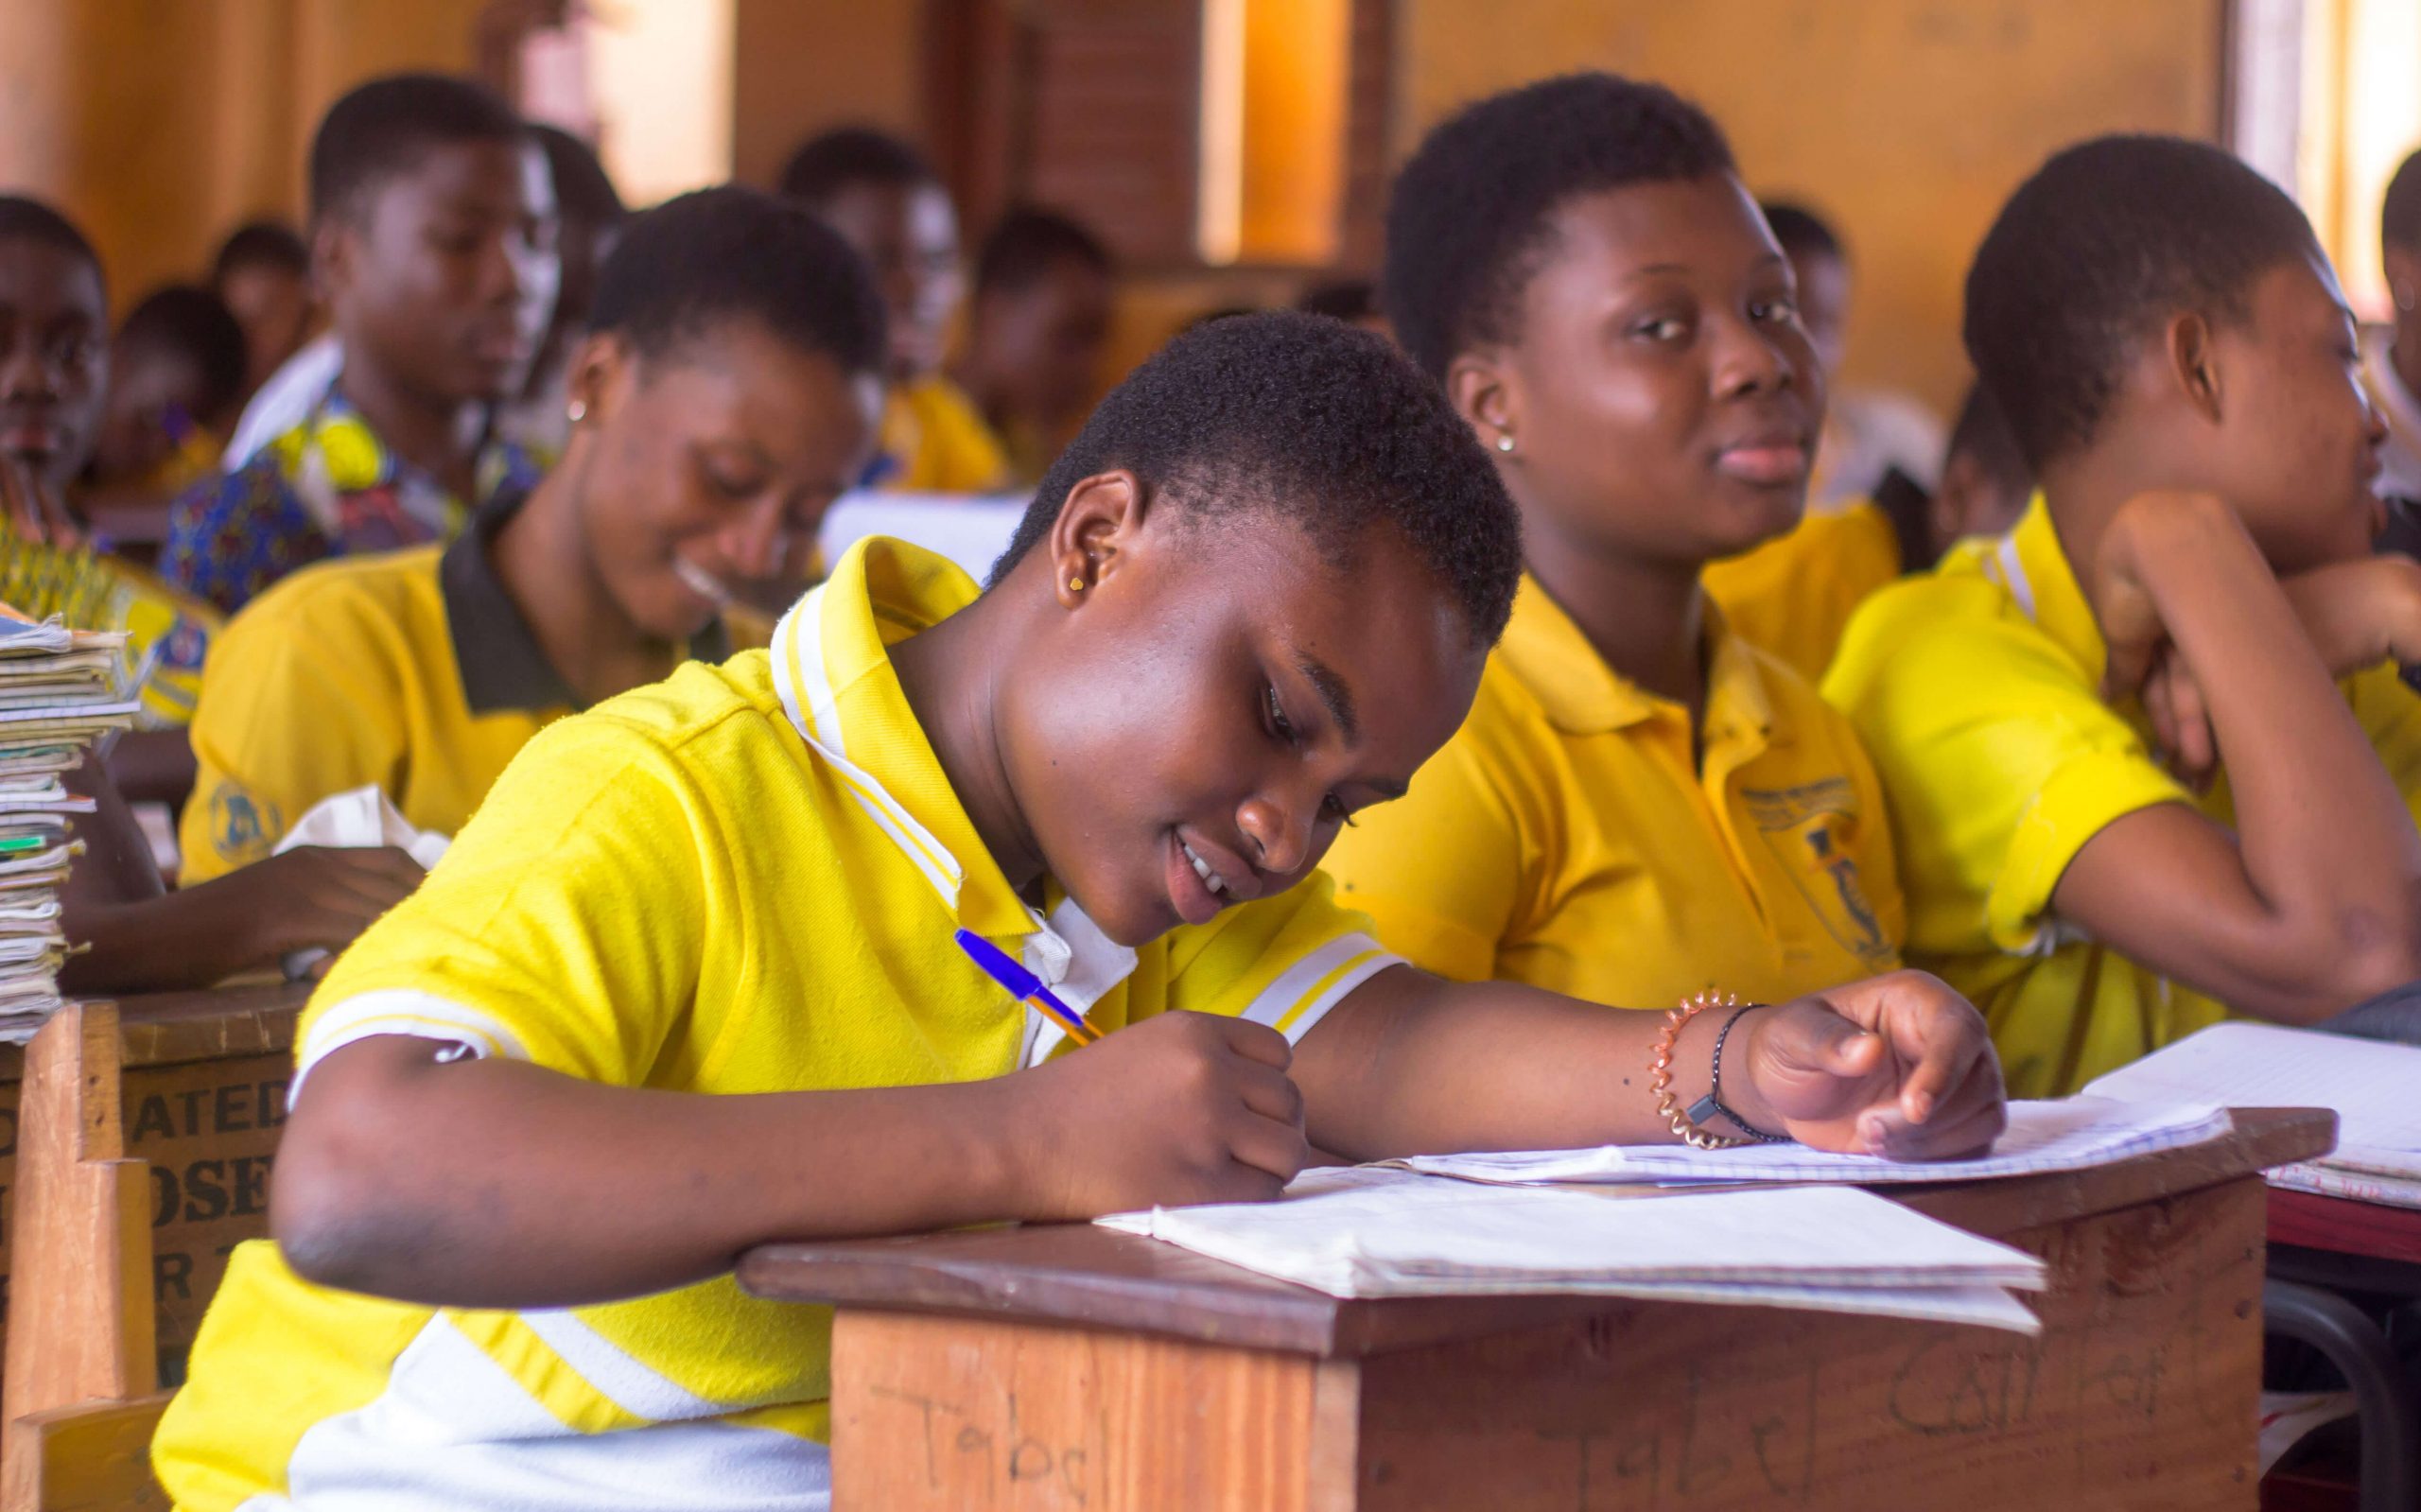 BECE candidates to write 3 new subjects